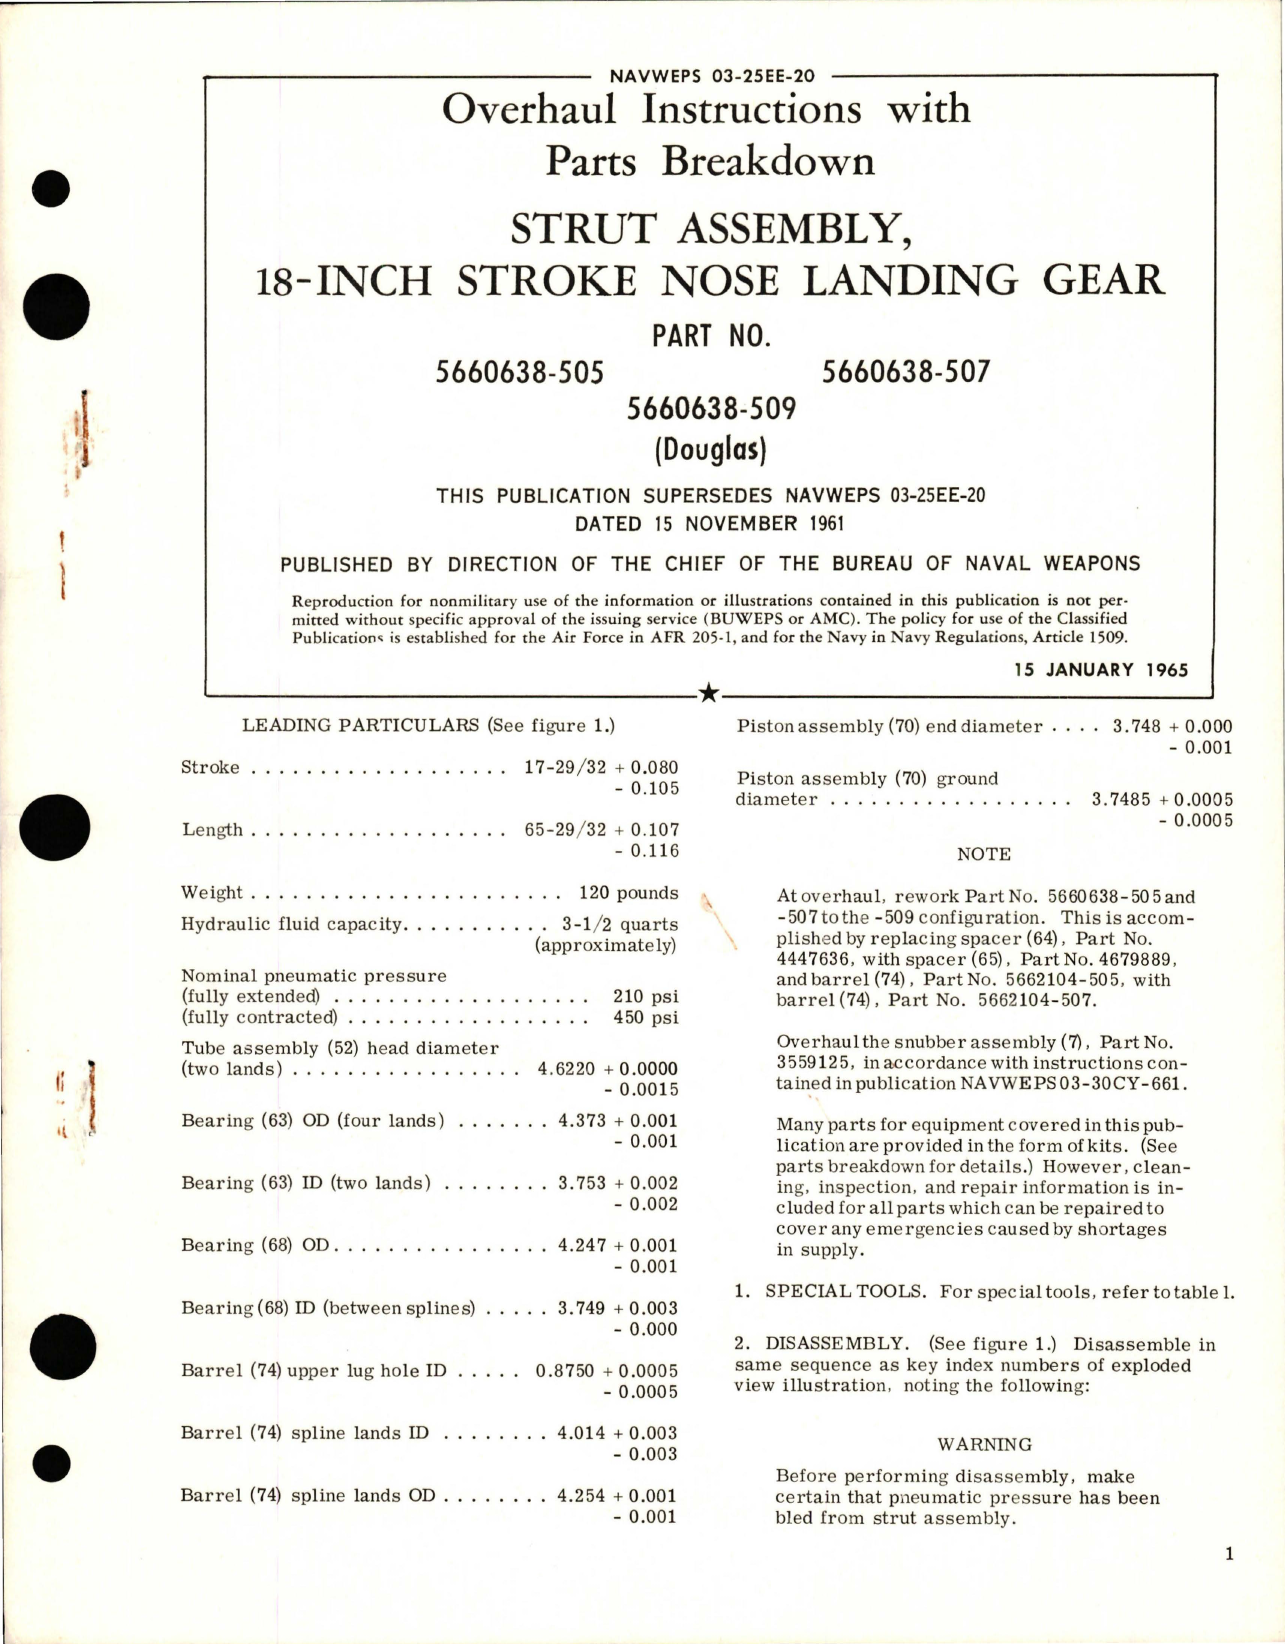 Sample page 1 from AirCorps Library document: Overhaul Instructions with Parts Breakdown for 18-Inch Stroke Nose Landing Gear Strut Assembly - Part 5660638-505, 5660638-507, and 5660638-509